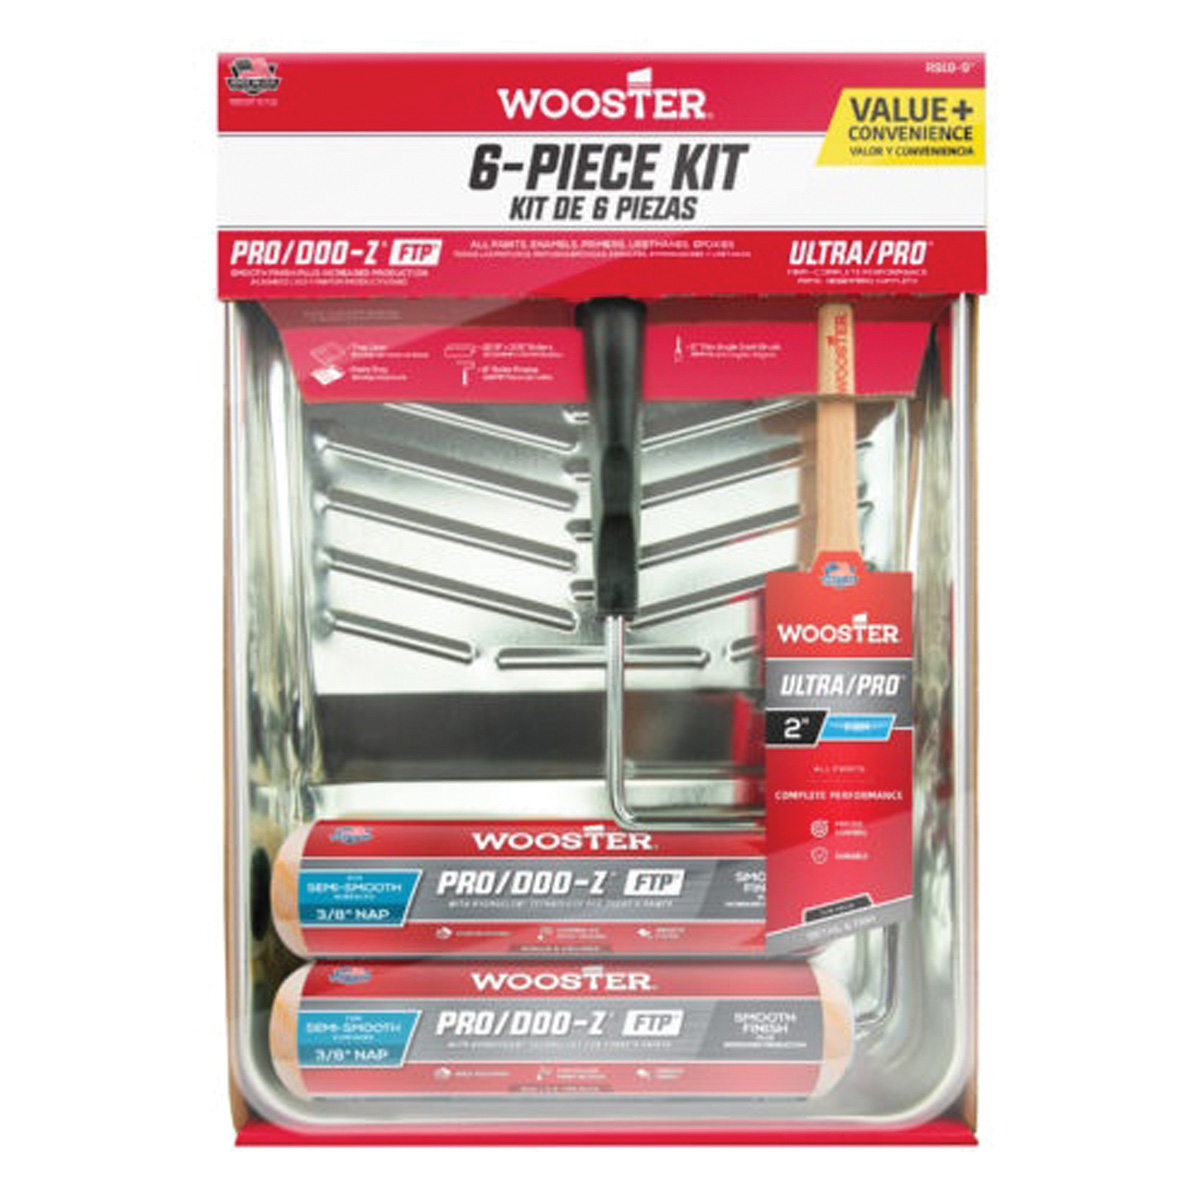 Wooster R918-9 Paint Roller Kit, Semi-Smooth Surface, Polypropylene, 6-Piece